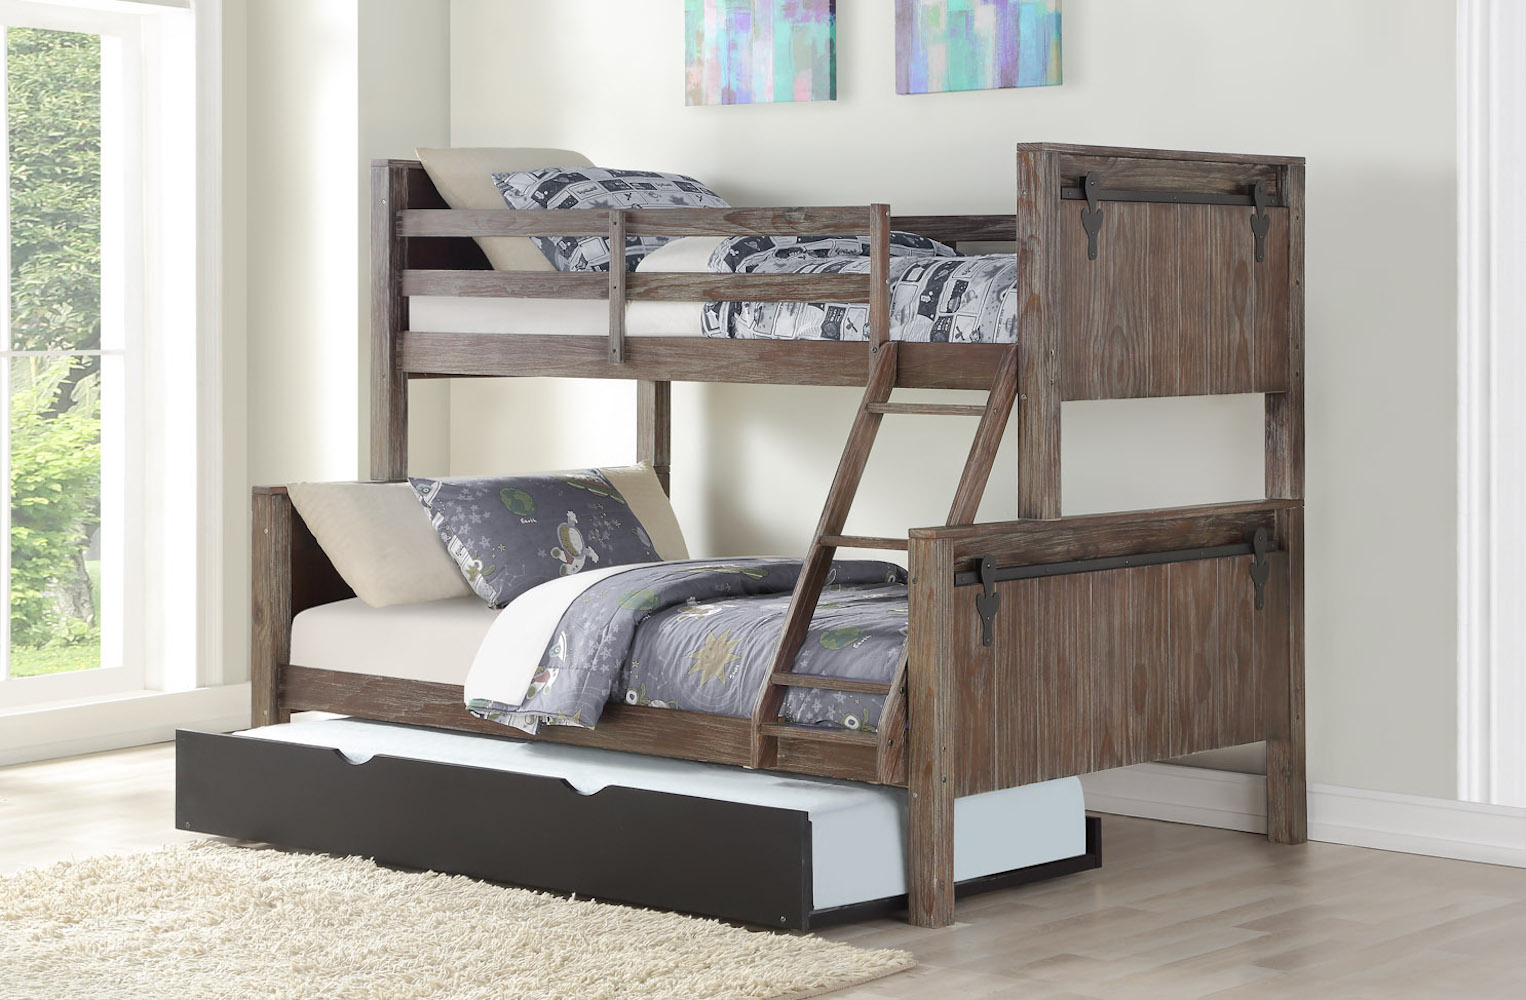 Donco Kids Twin Bunkbed Trundle Bed